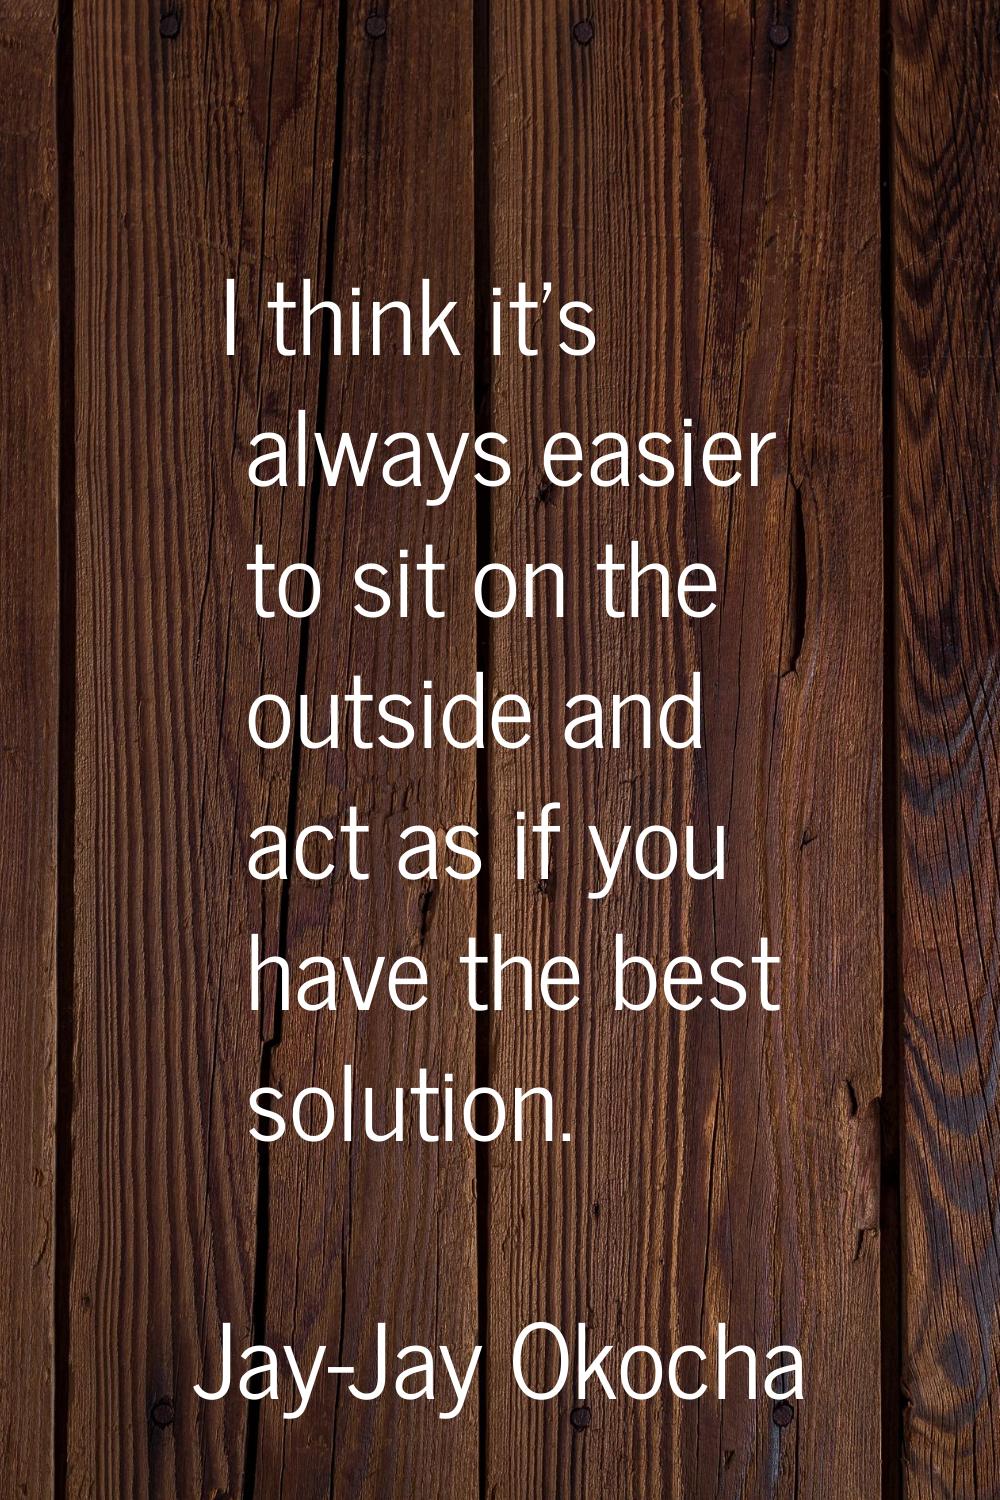 I think it's always easier to sit on the outside and act as if you have the best solution.